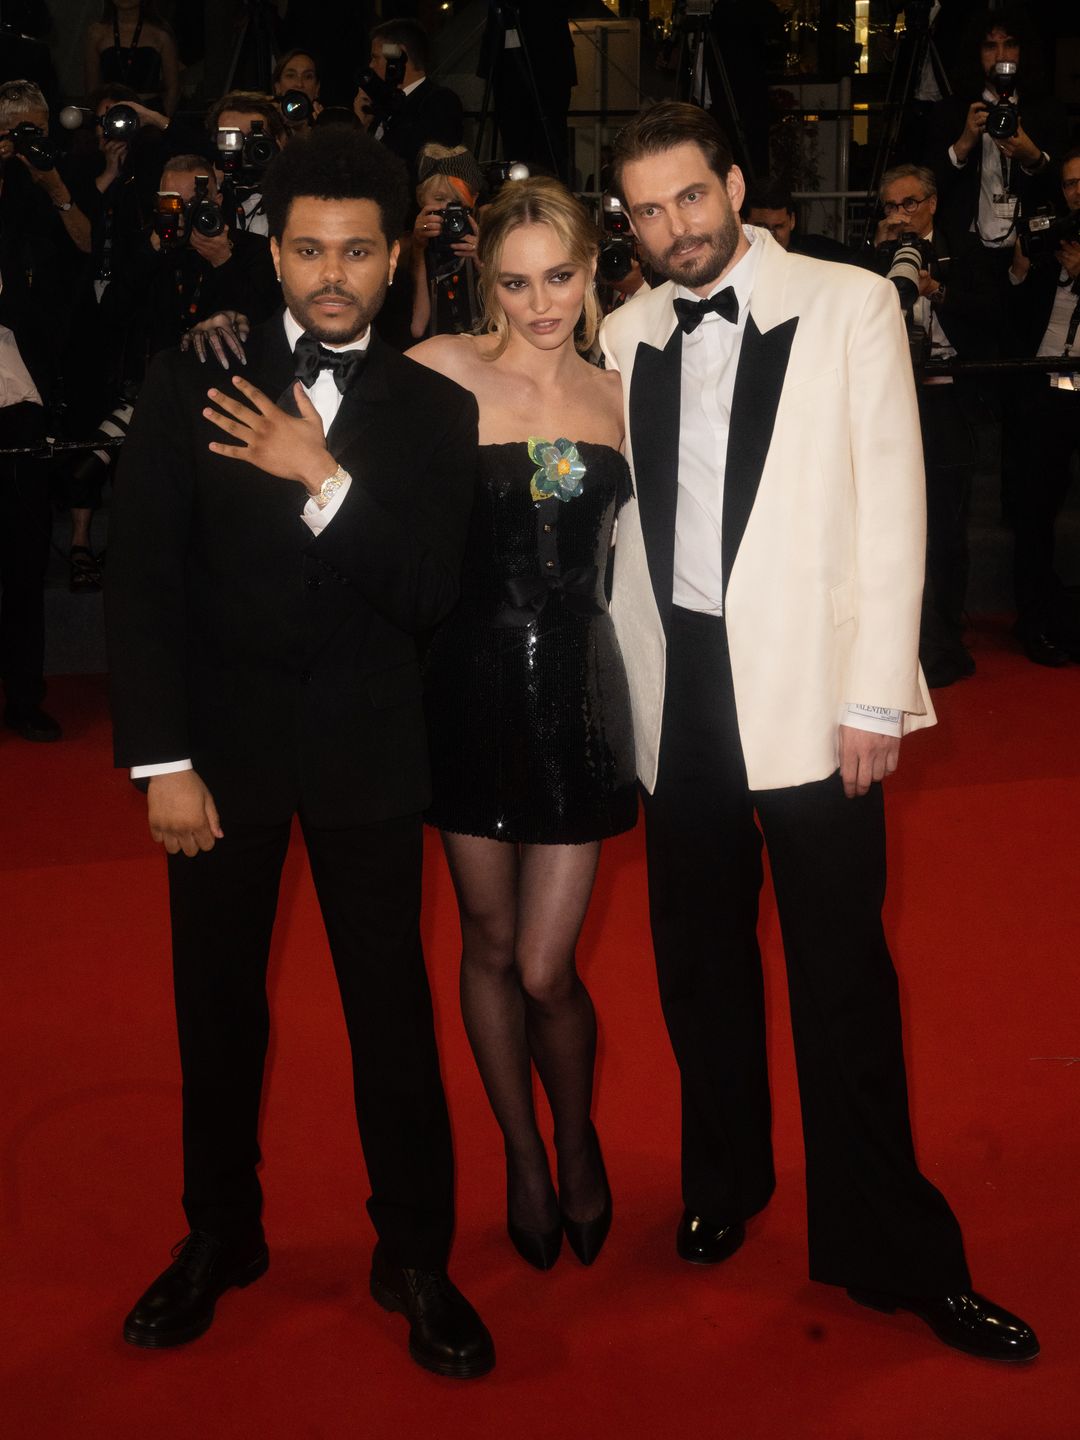 Lily-Rose Depp, Sam Levinson and The Weeknd on the red carpet 